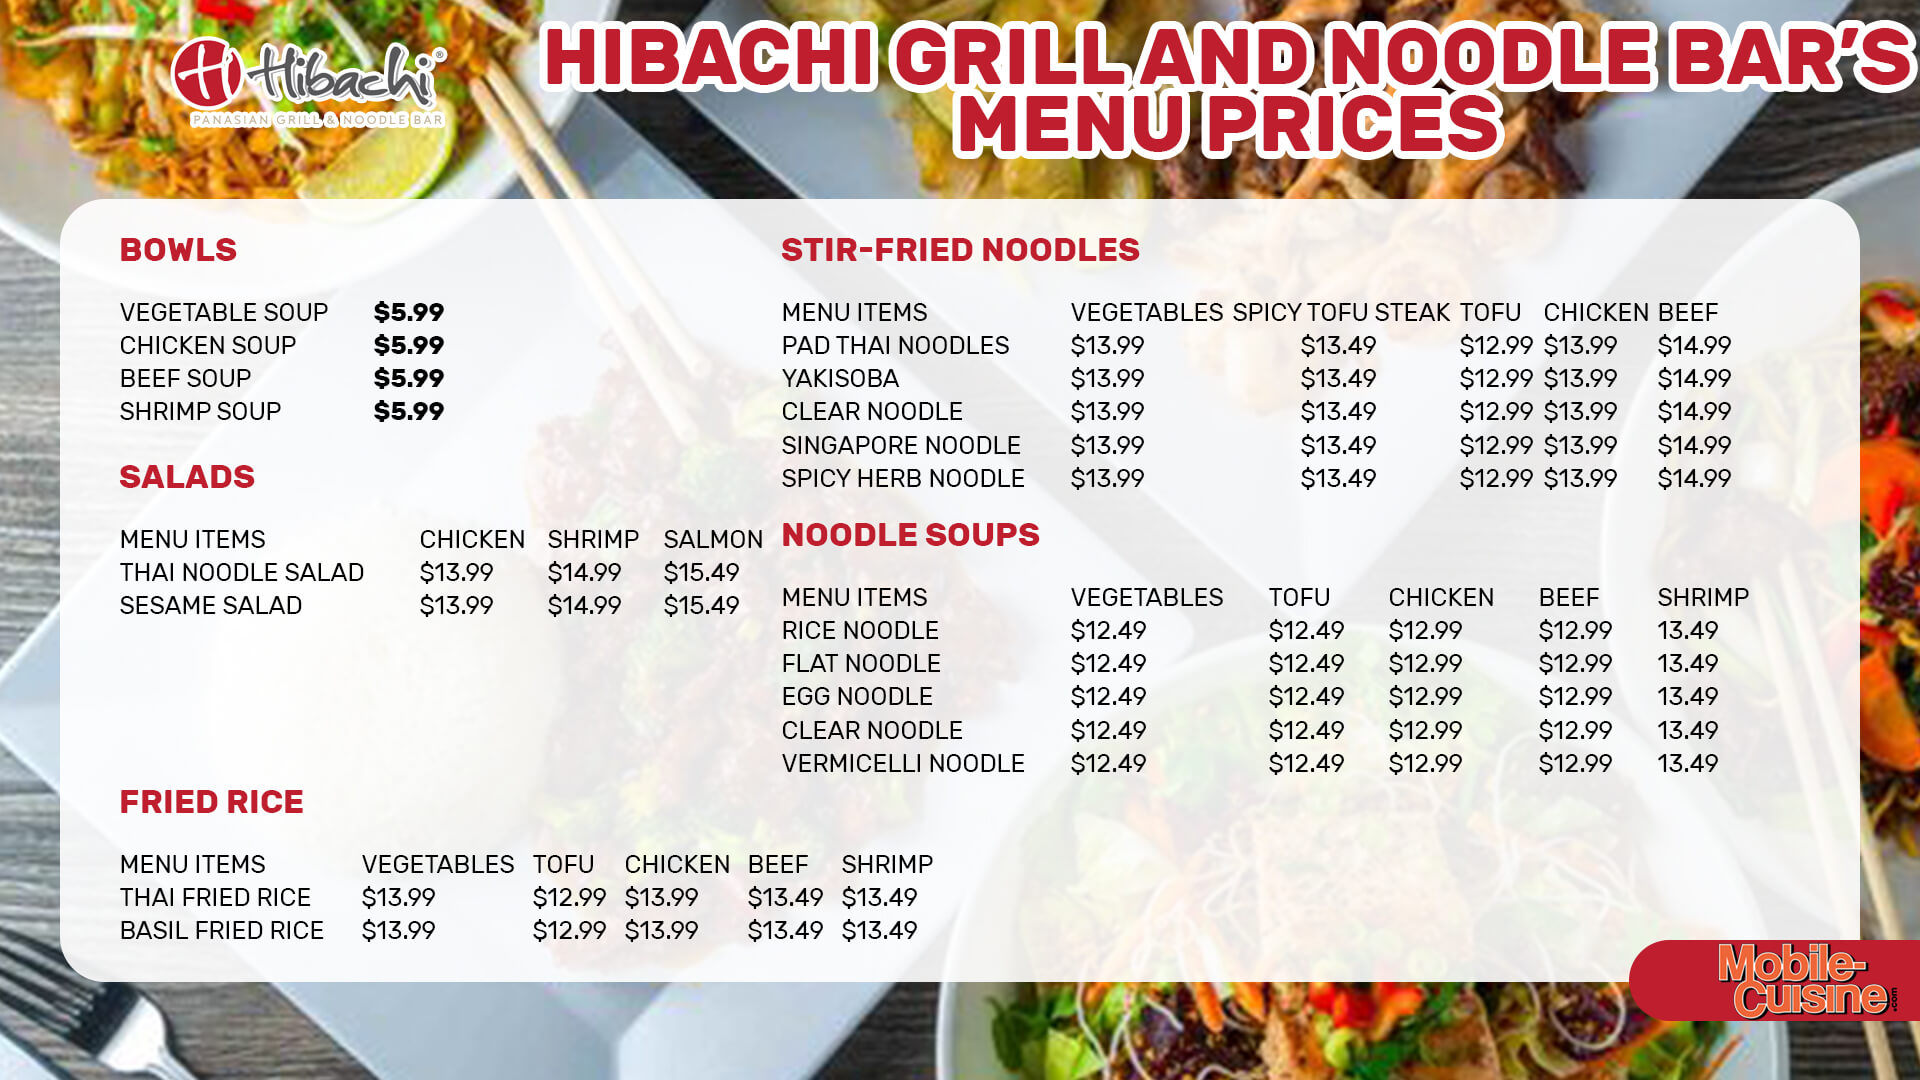 Hibachi-Grill-and-Noodle-Bar-menu-prices